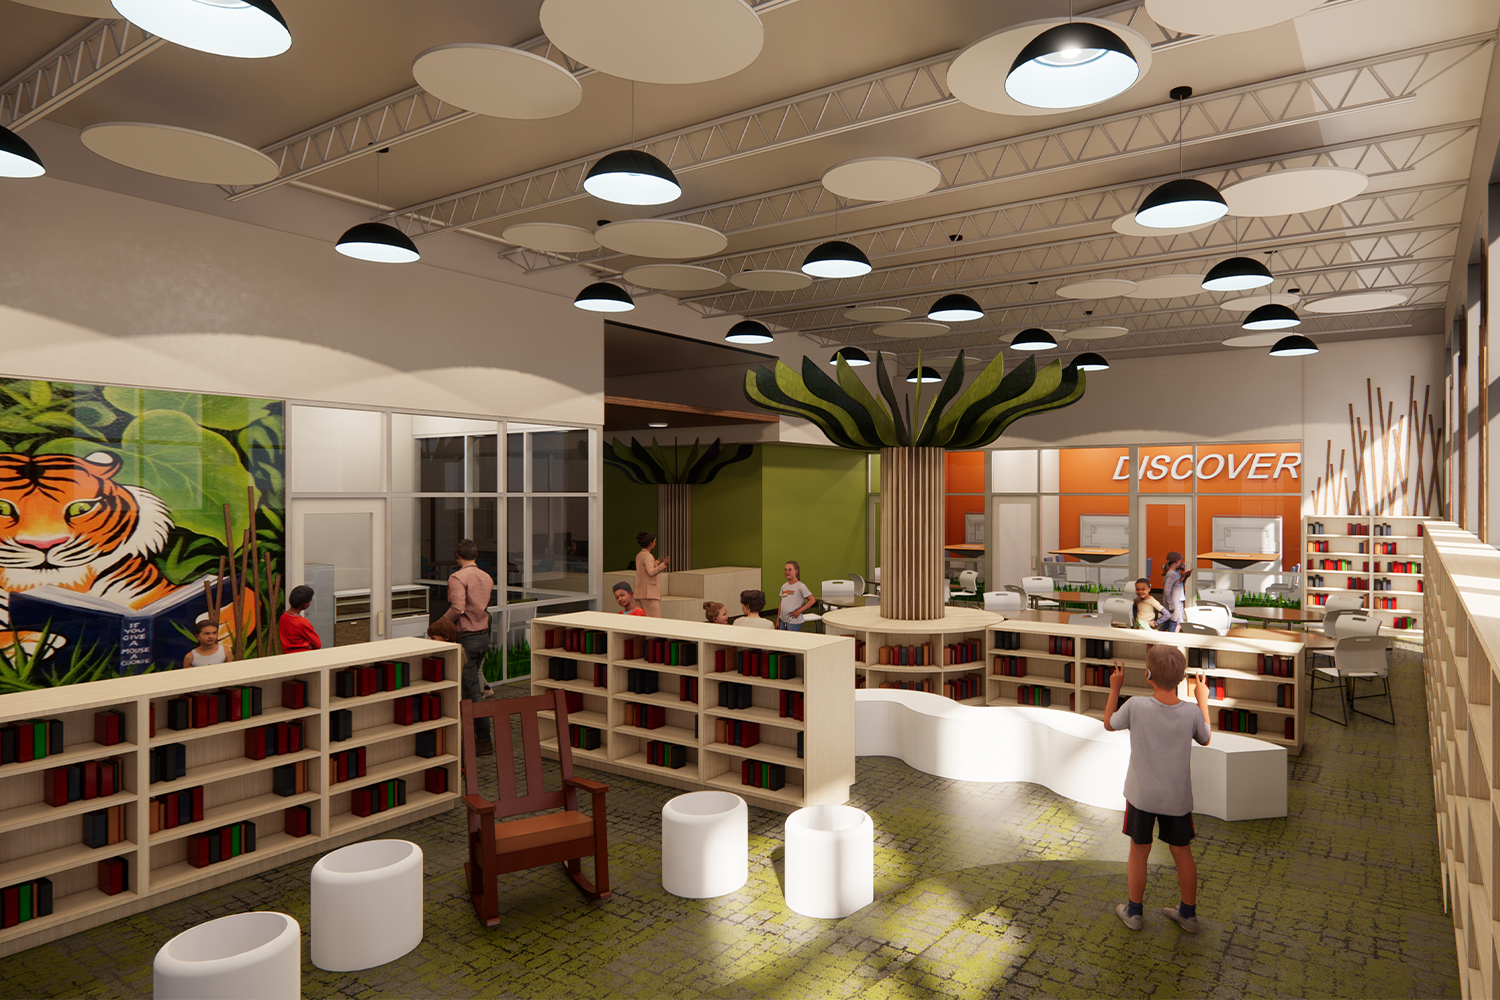 Rendering of the media center at Rutledge Pearson Elementary School